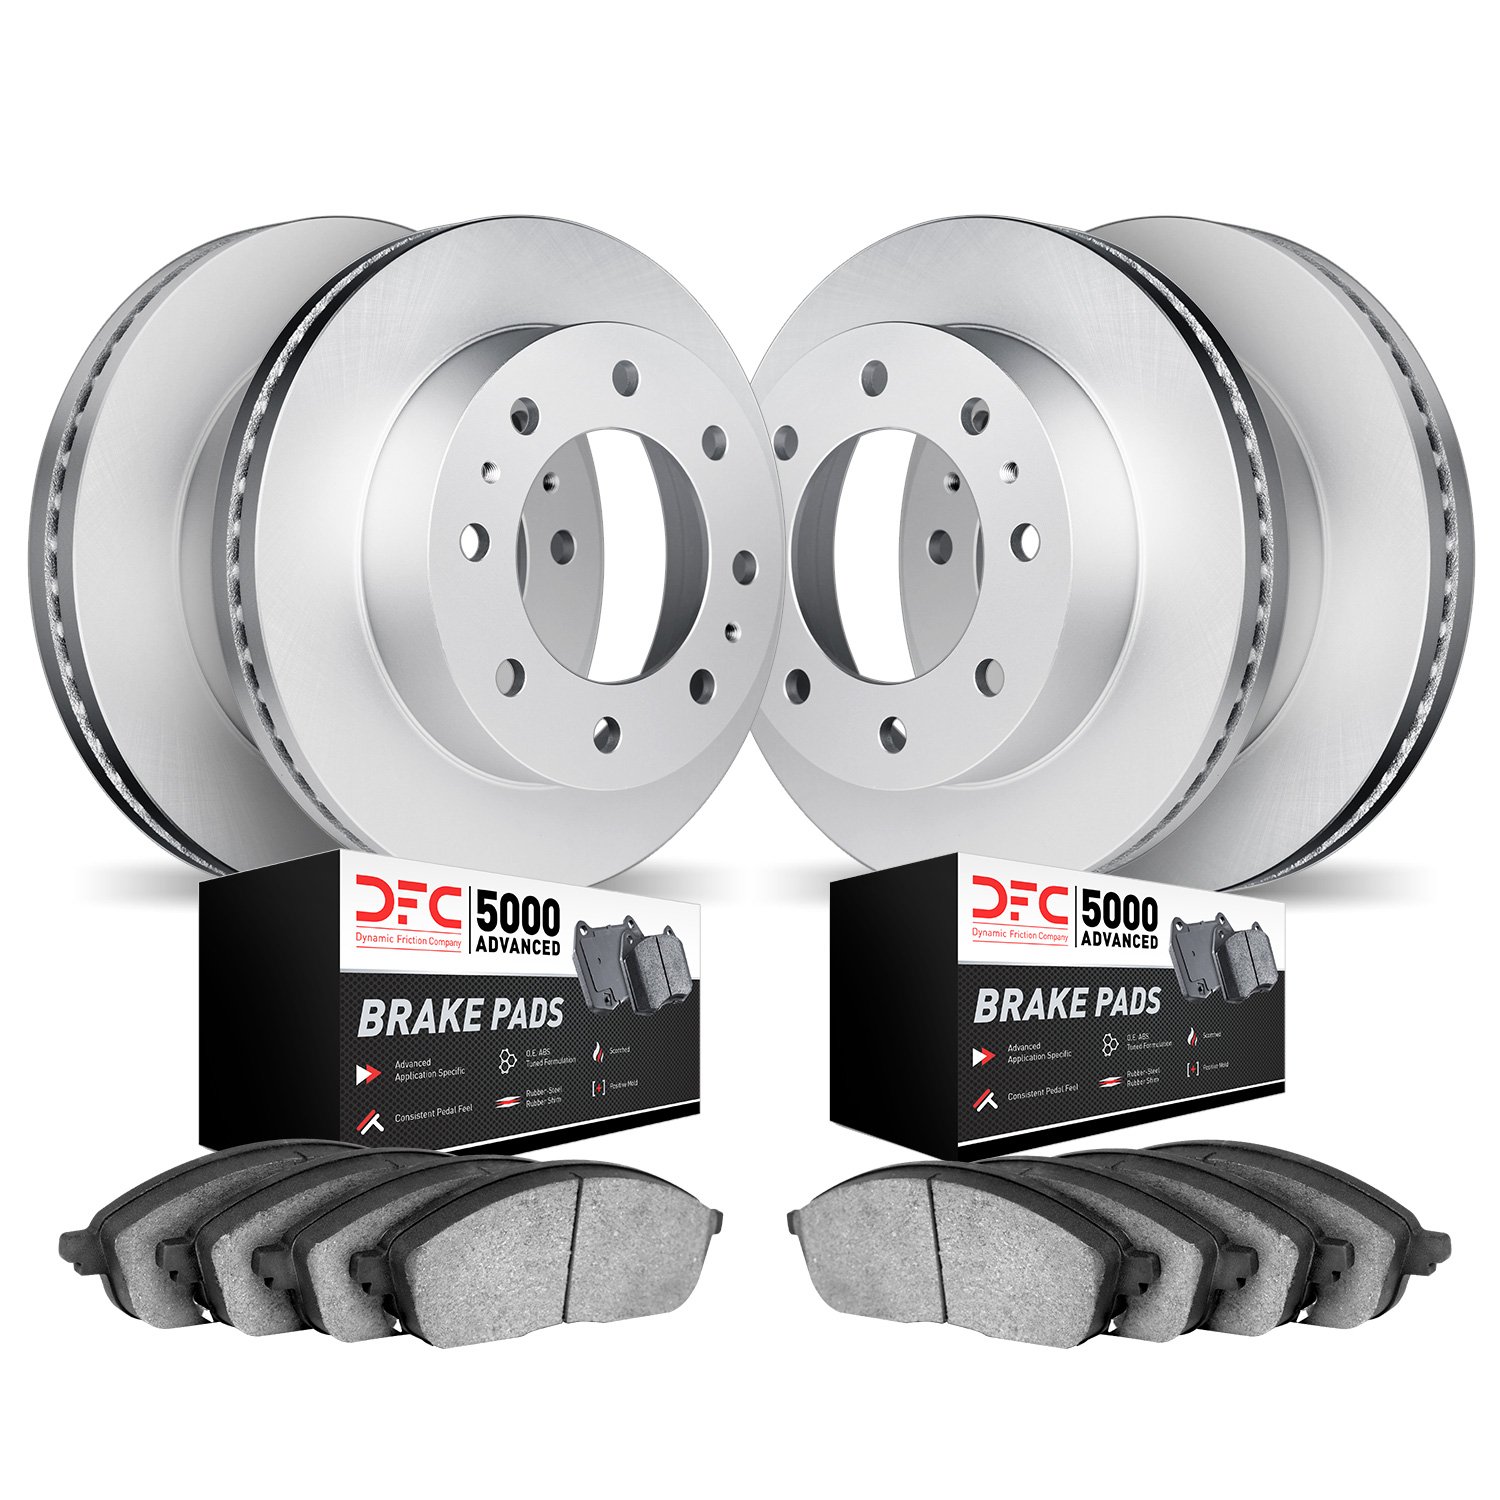 4504-54048 Geospec Brake Rotors w/5000 Advanced Brake Pads Kit, 2006-2010 Ford/Lincoln/Mercury/Mazda, Position: Front and Rear